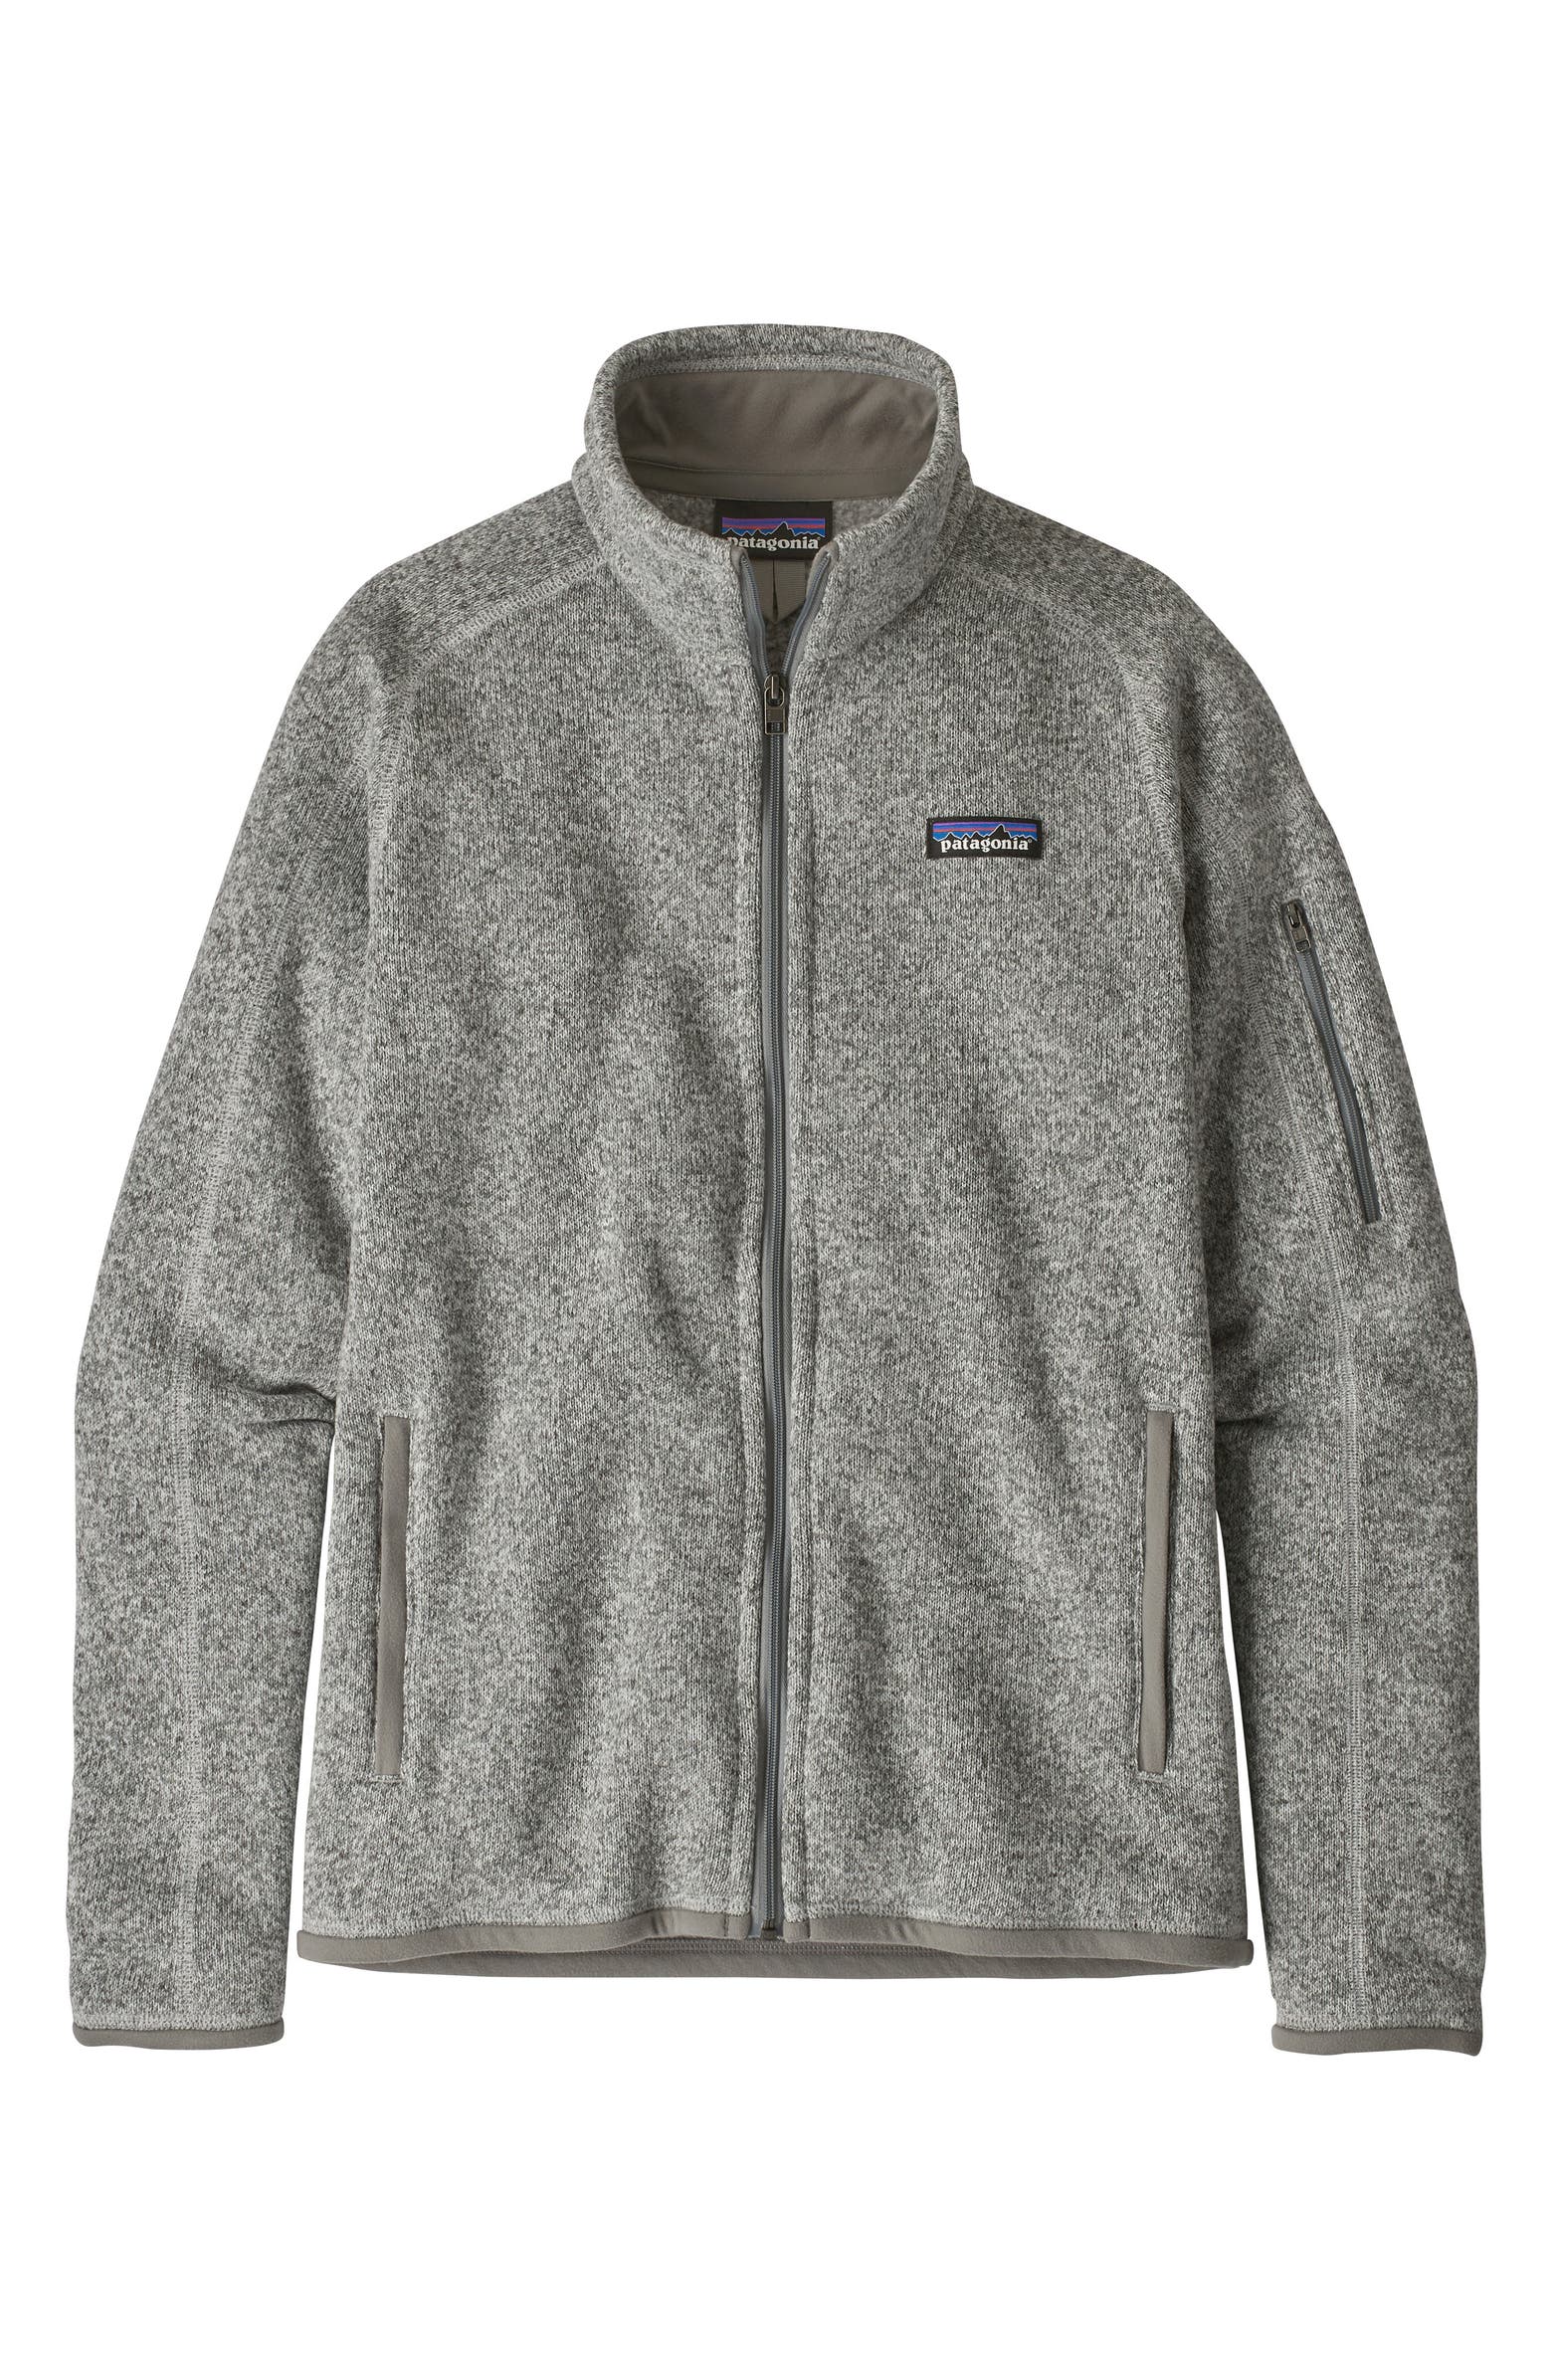 Better Sweater® Jacket by Patagonia